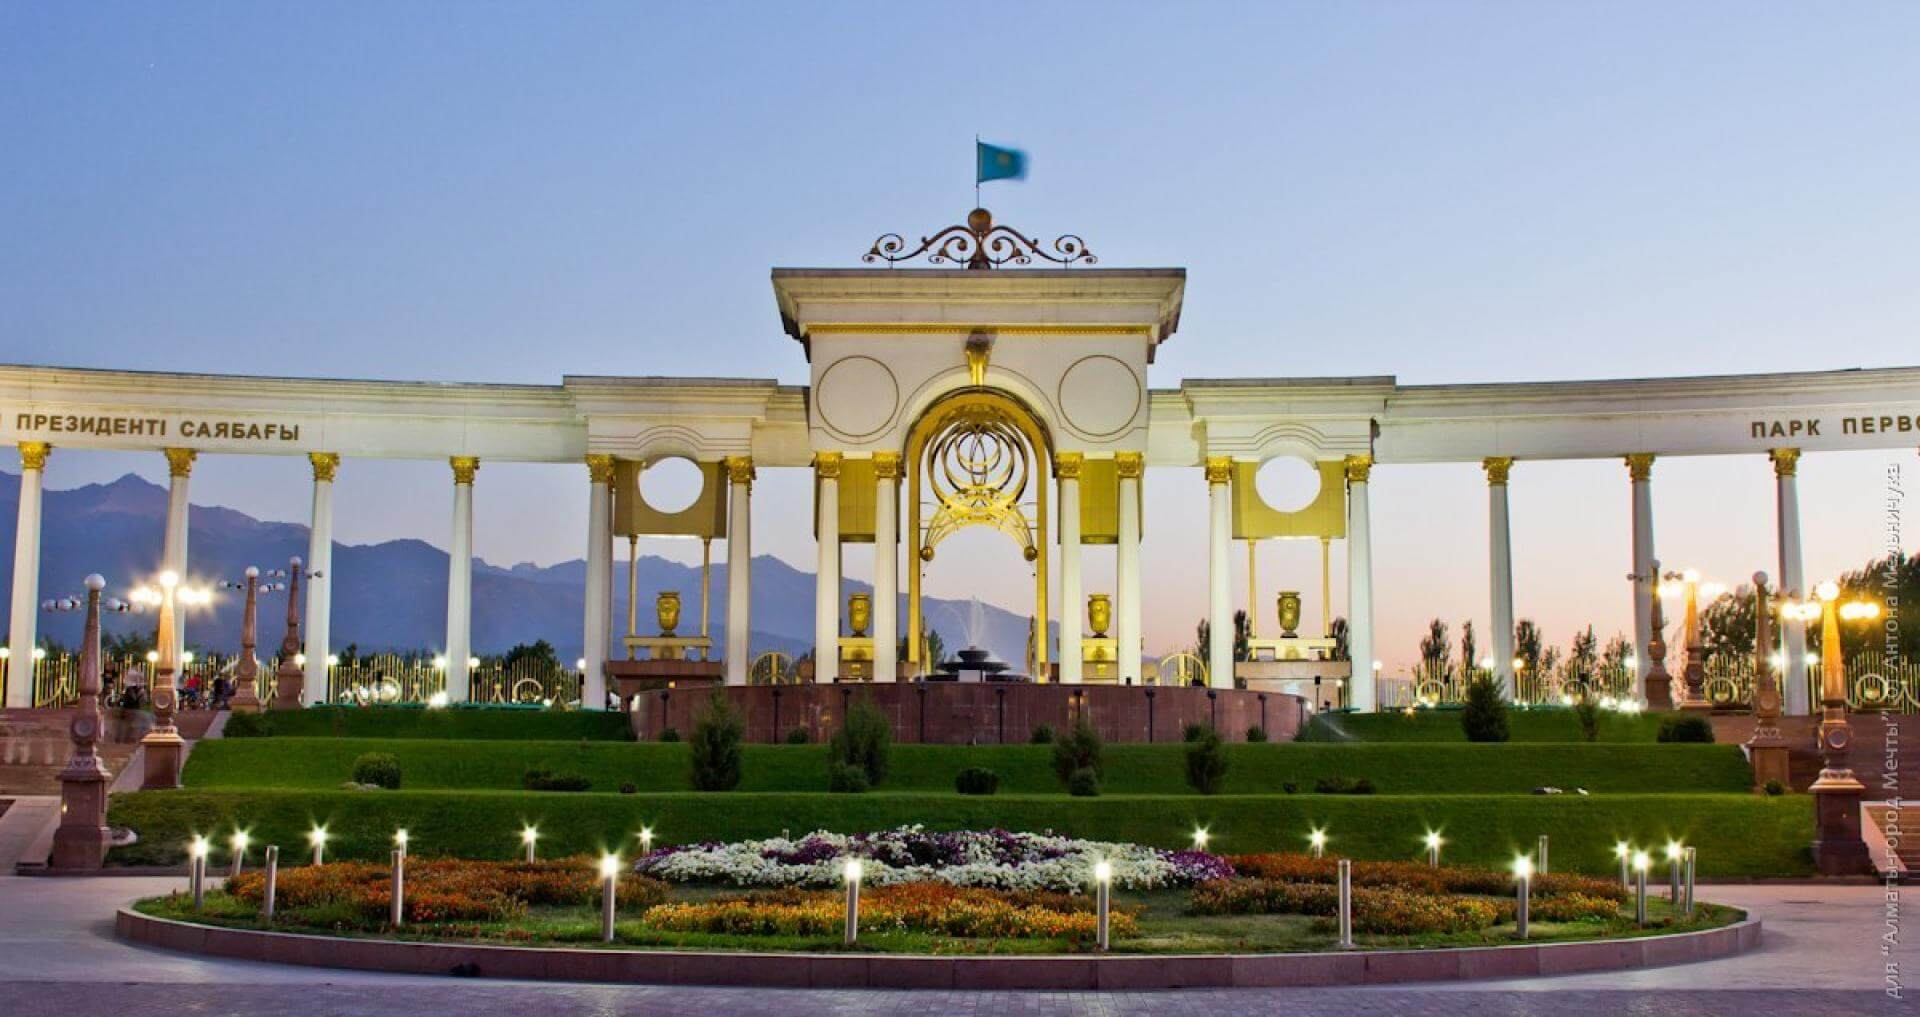 In 2018, more than 1 million tourists visited Almaty